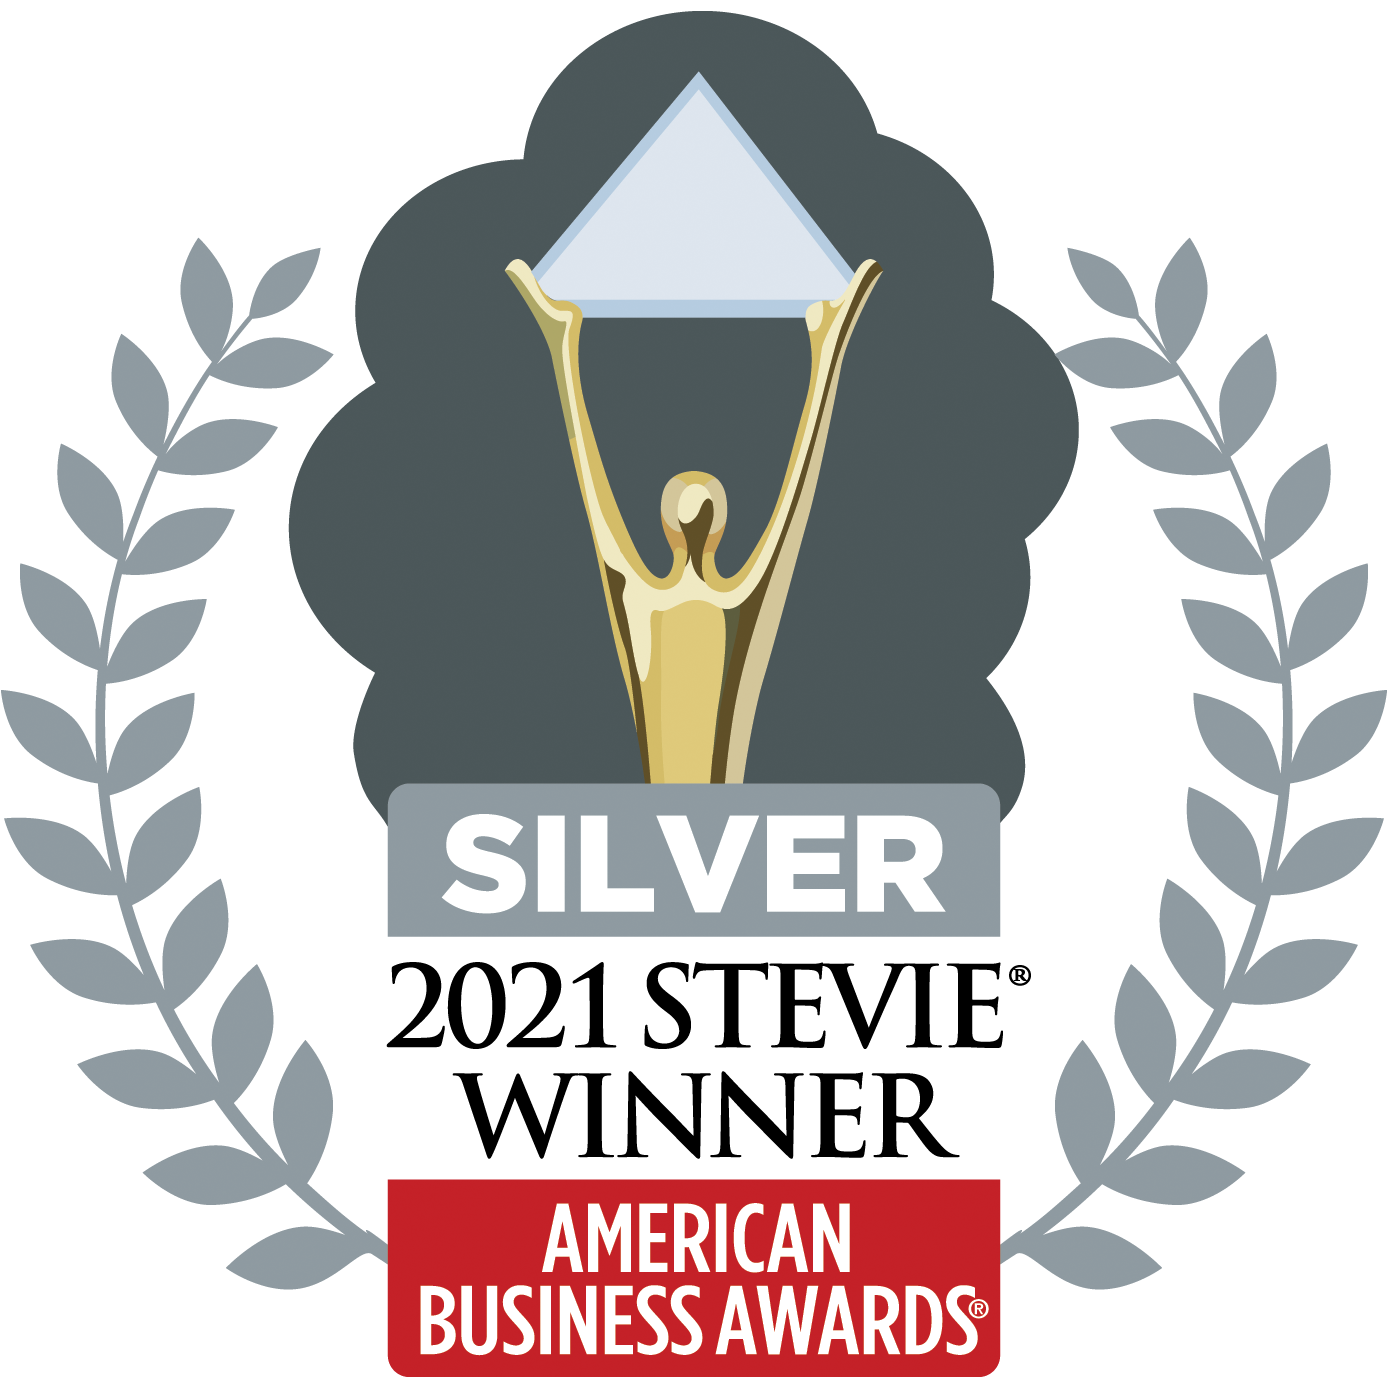 American Business Awards Silver 2021